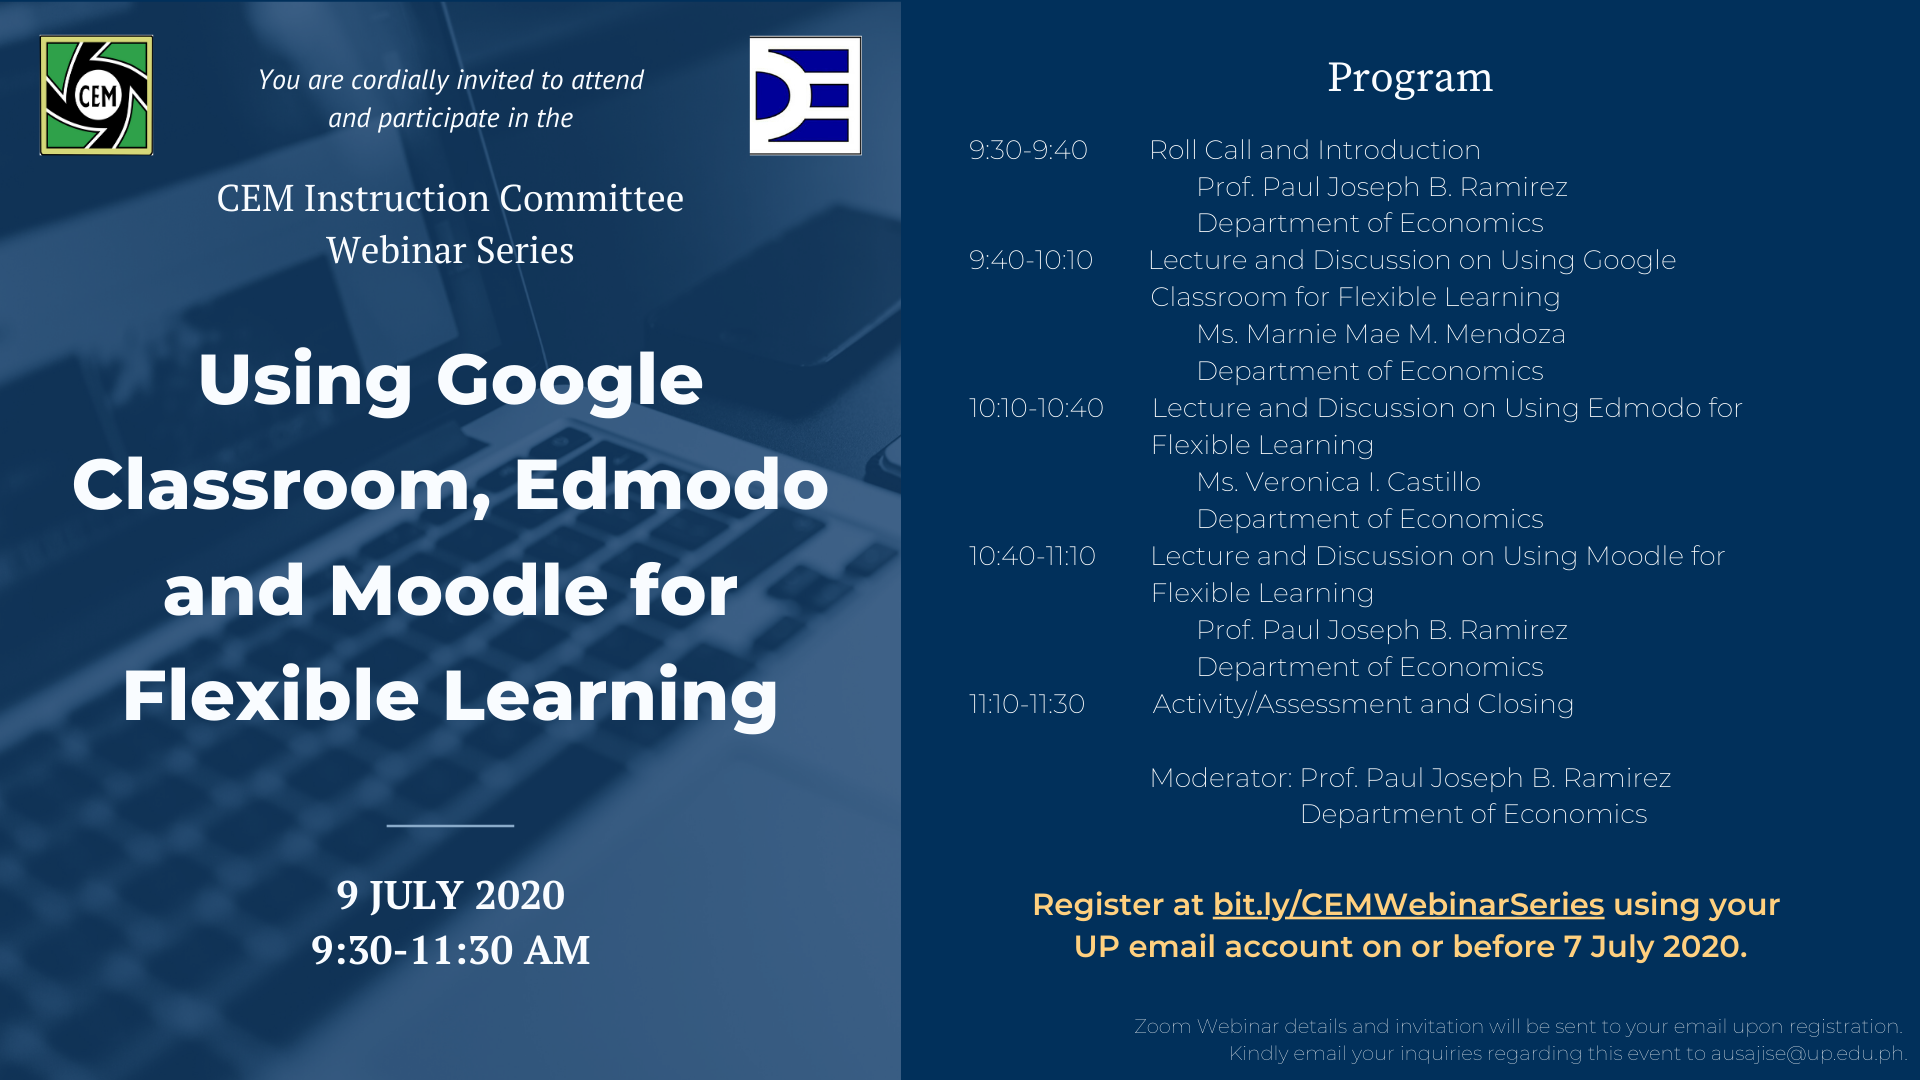 CEM Instruction Committee Webinar Series : Using Google Classroom, Edmodo and Moodle for Flexible Learning